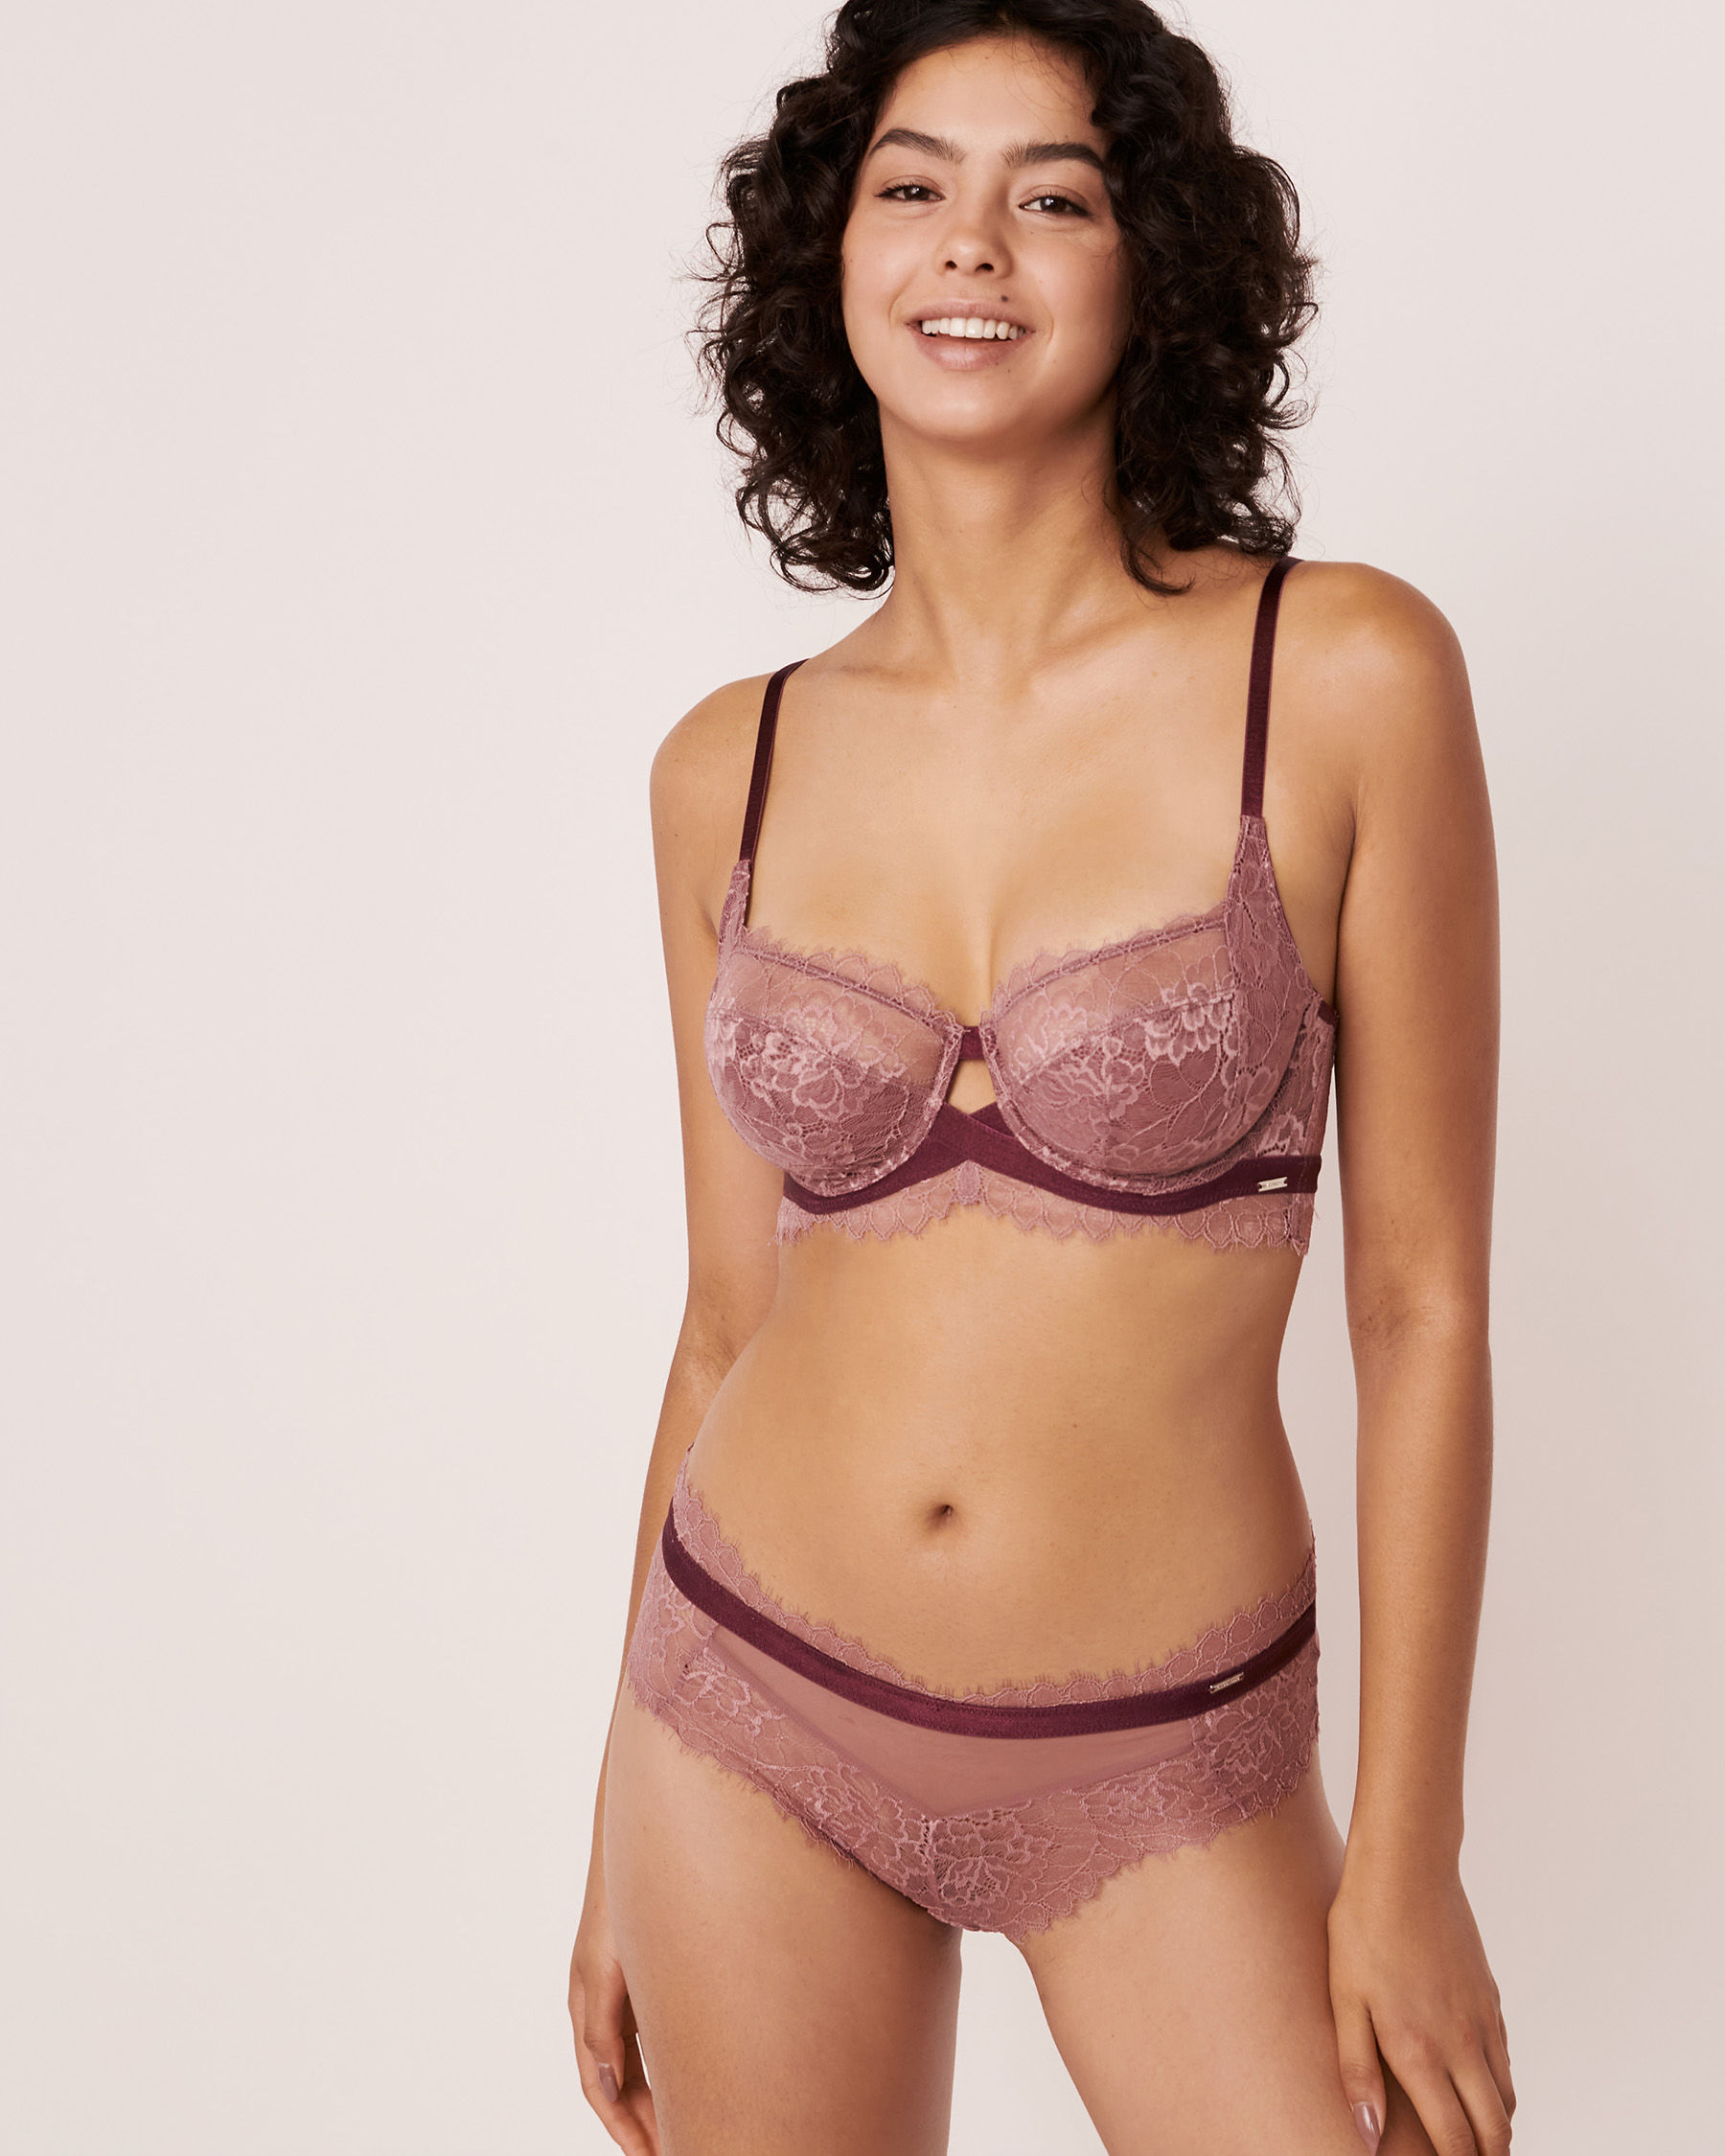 https://www.lavieenrose.com/globalassets/lver/pictures-21f2-and--/unlined/unlined-full-coverage-bra-10100026-50020/10100026_50020_1.jpg